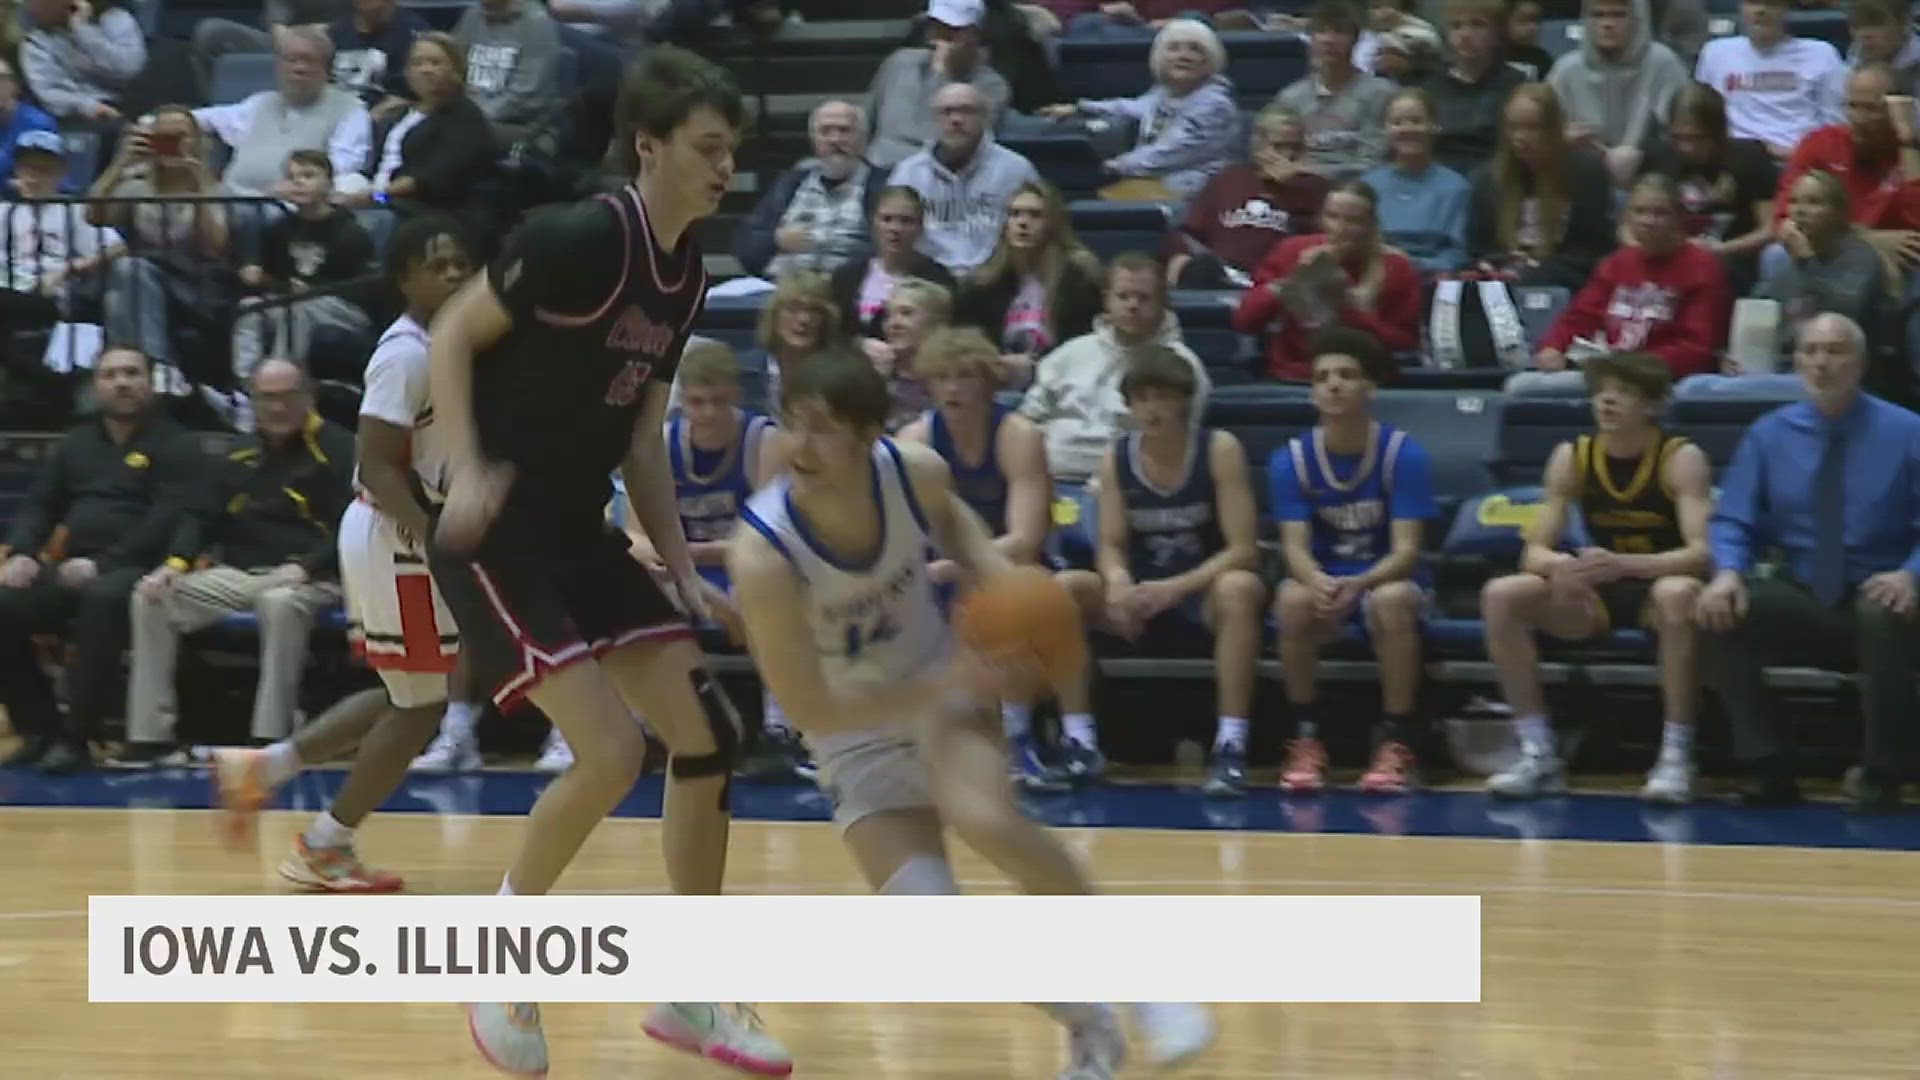 In the annual bi-state game, bragging rights belong to Illinois after wins on both the boys' and girls' sides.